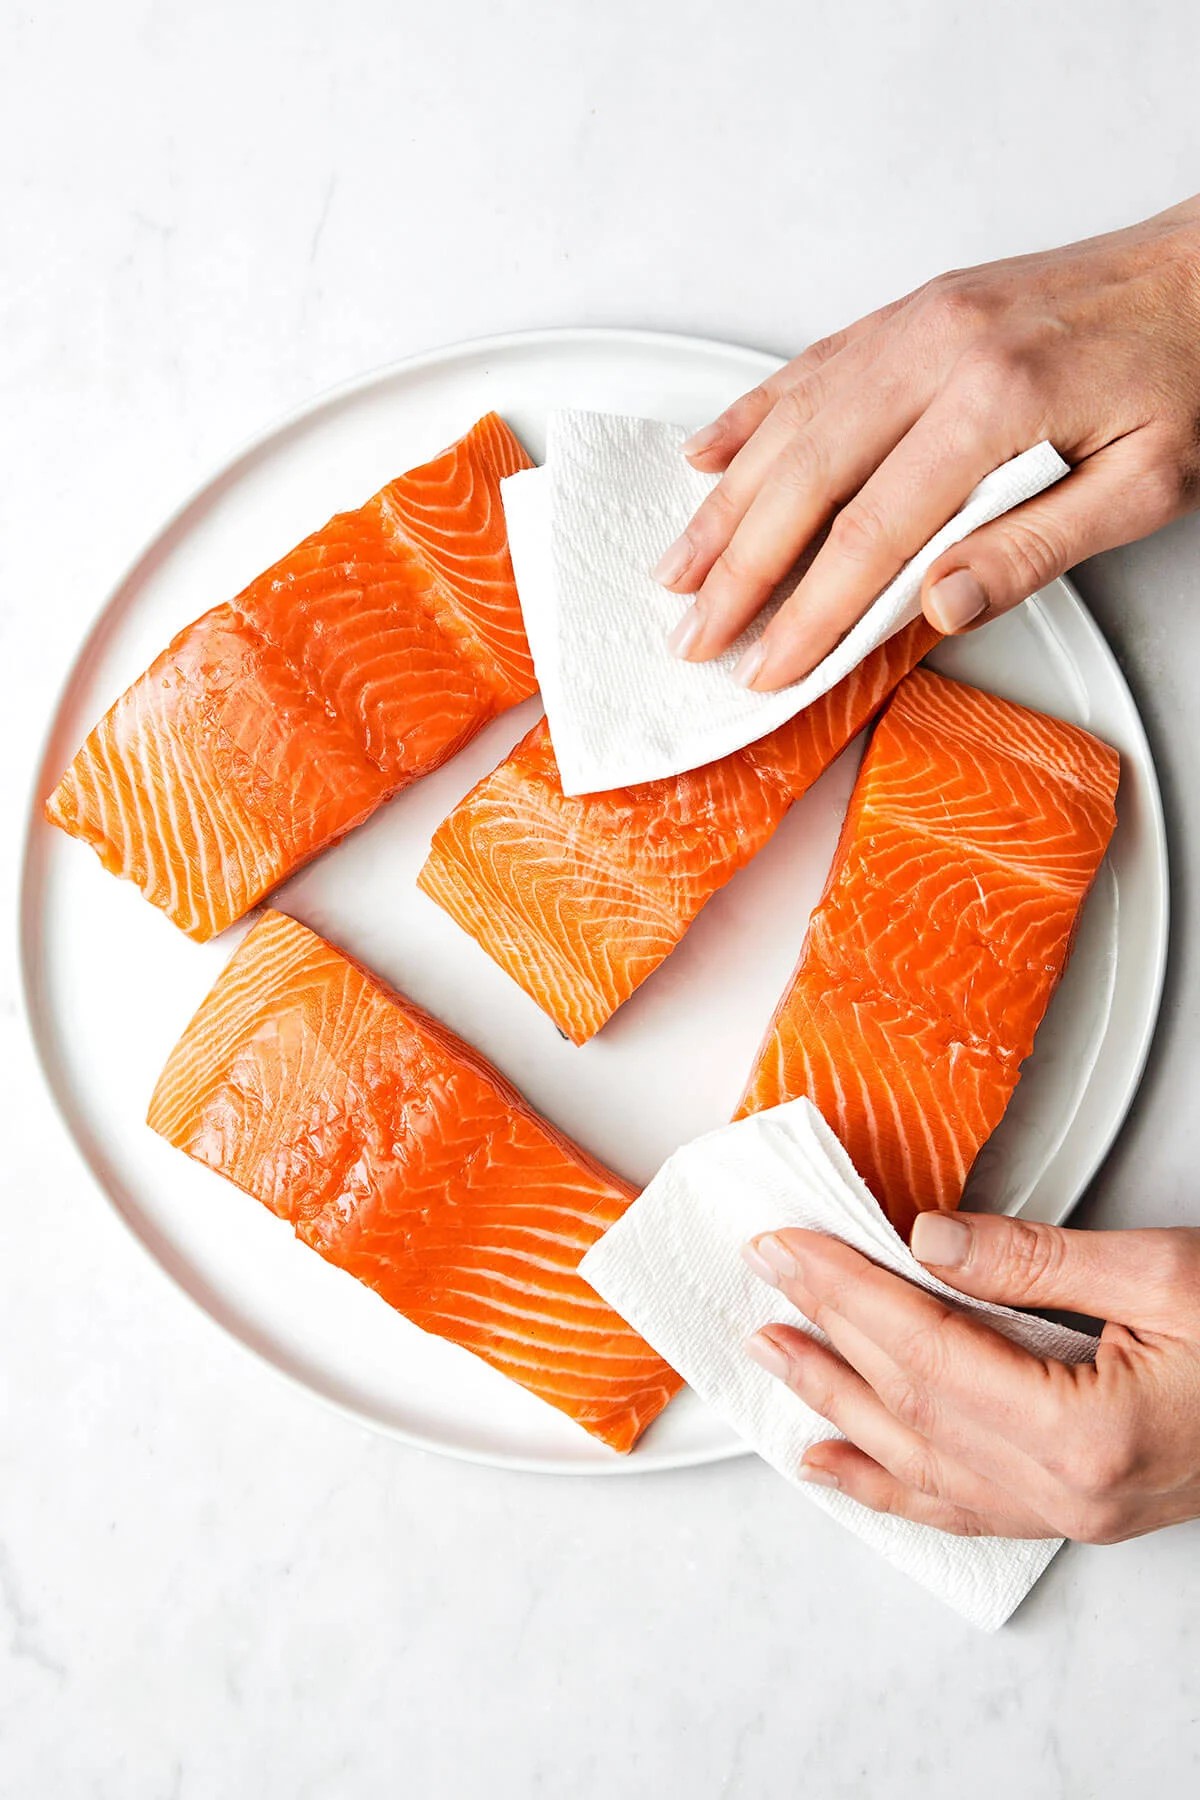 Patting salmon dry with a paper towel.